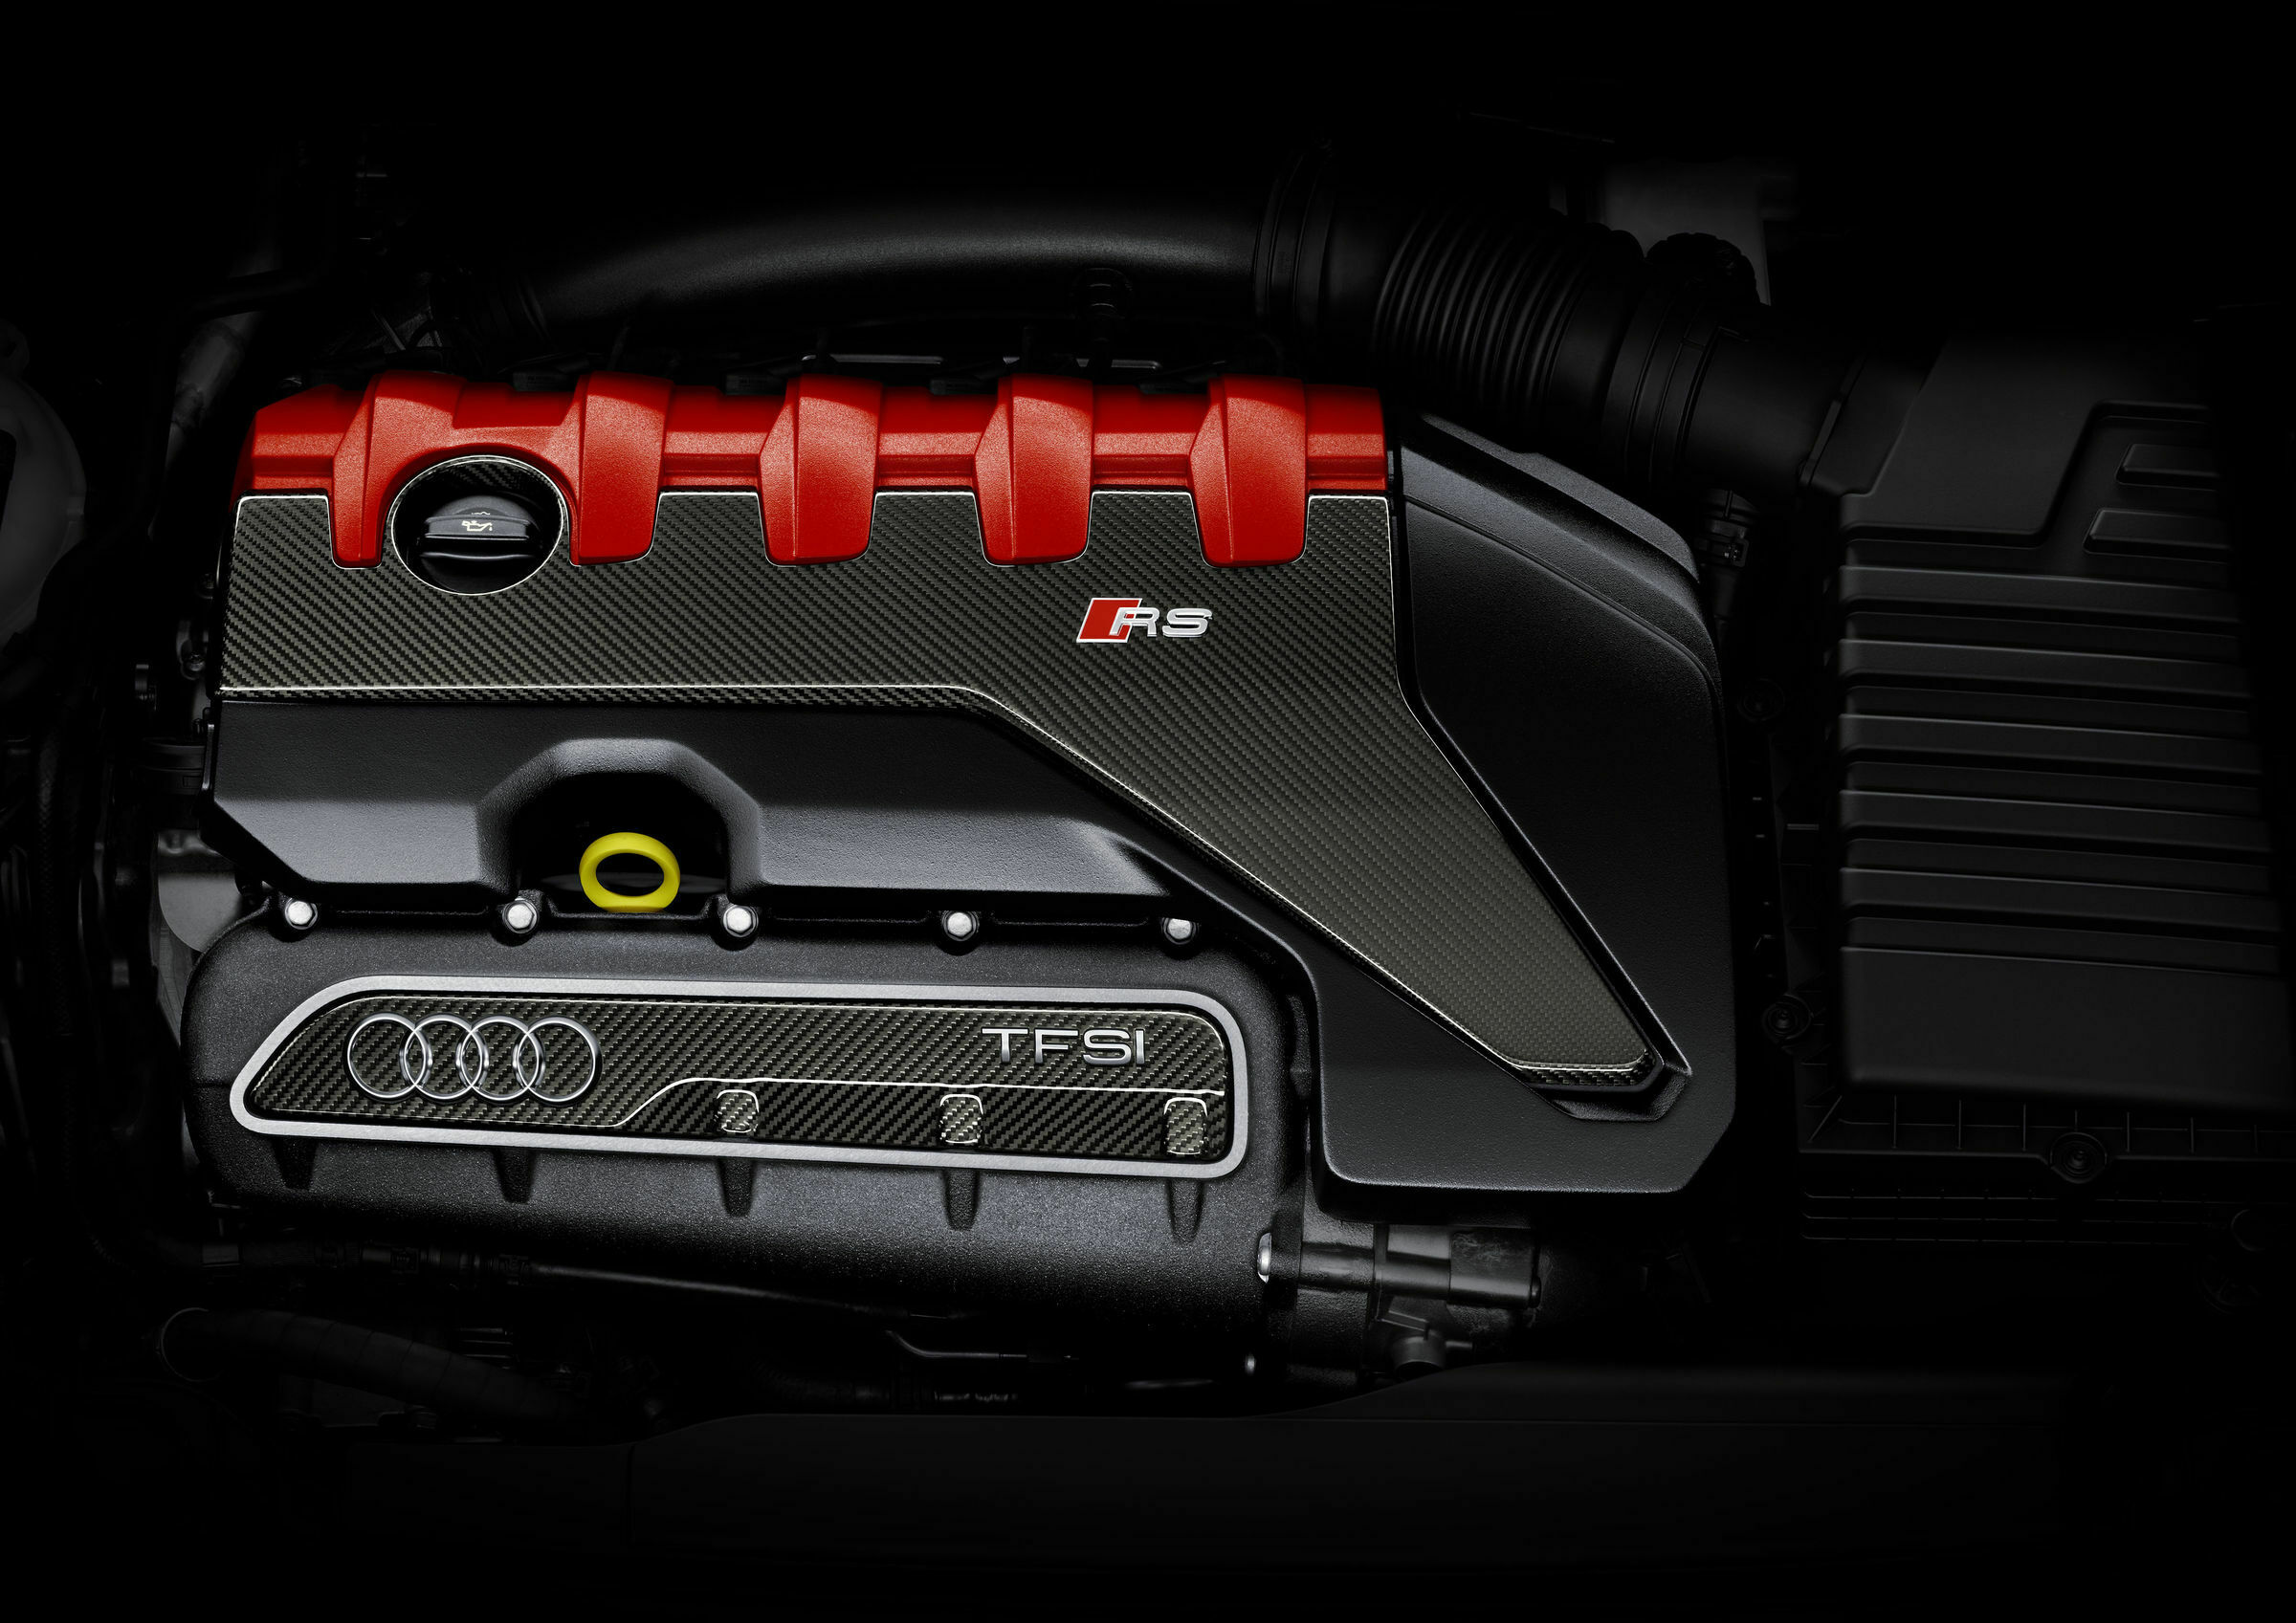 Ninth victory in a row: Audi 2.5 TFSI engine named “Engine of the Year” once again